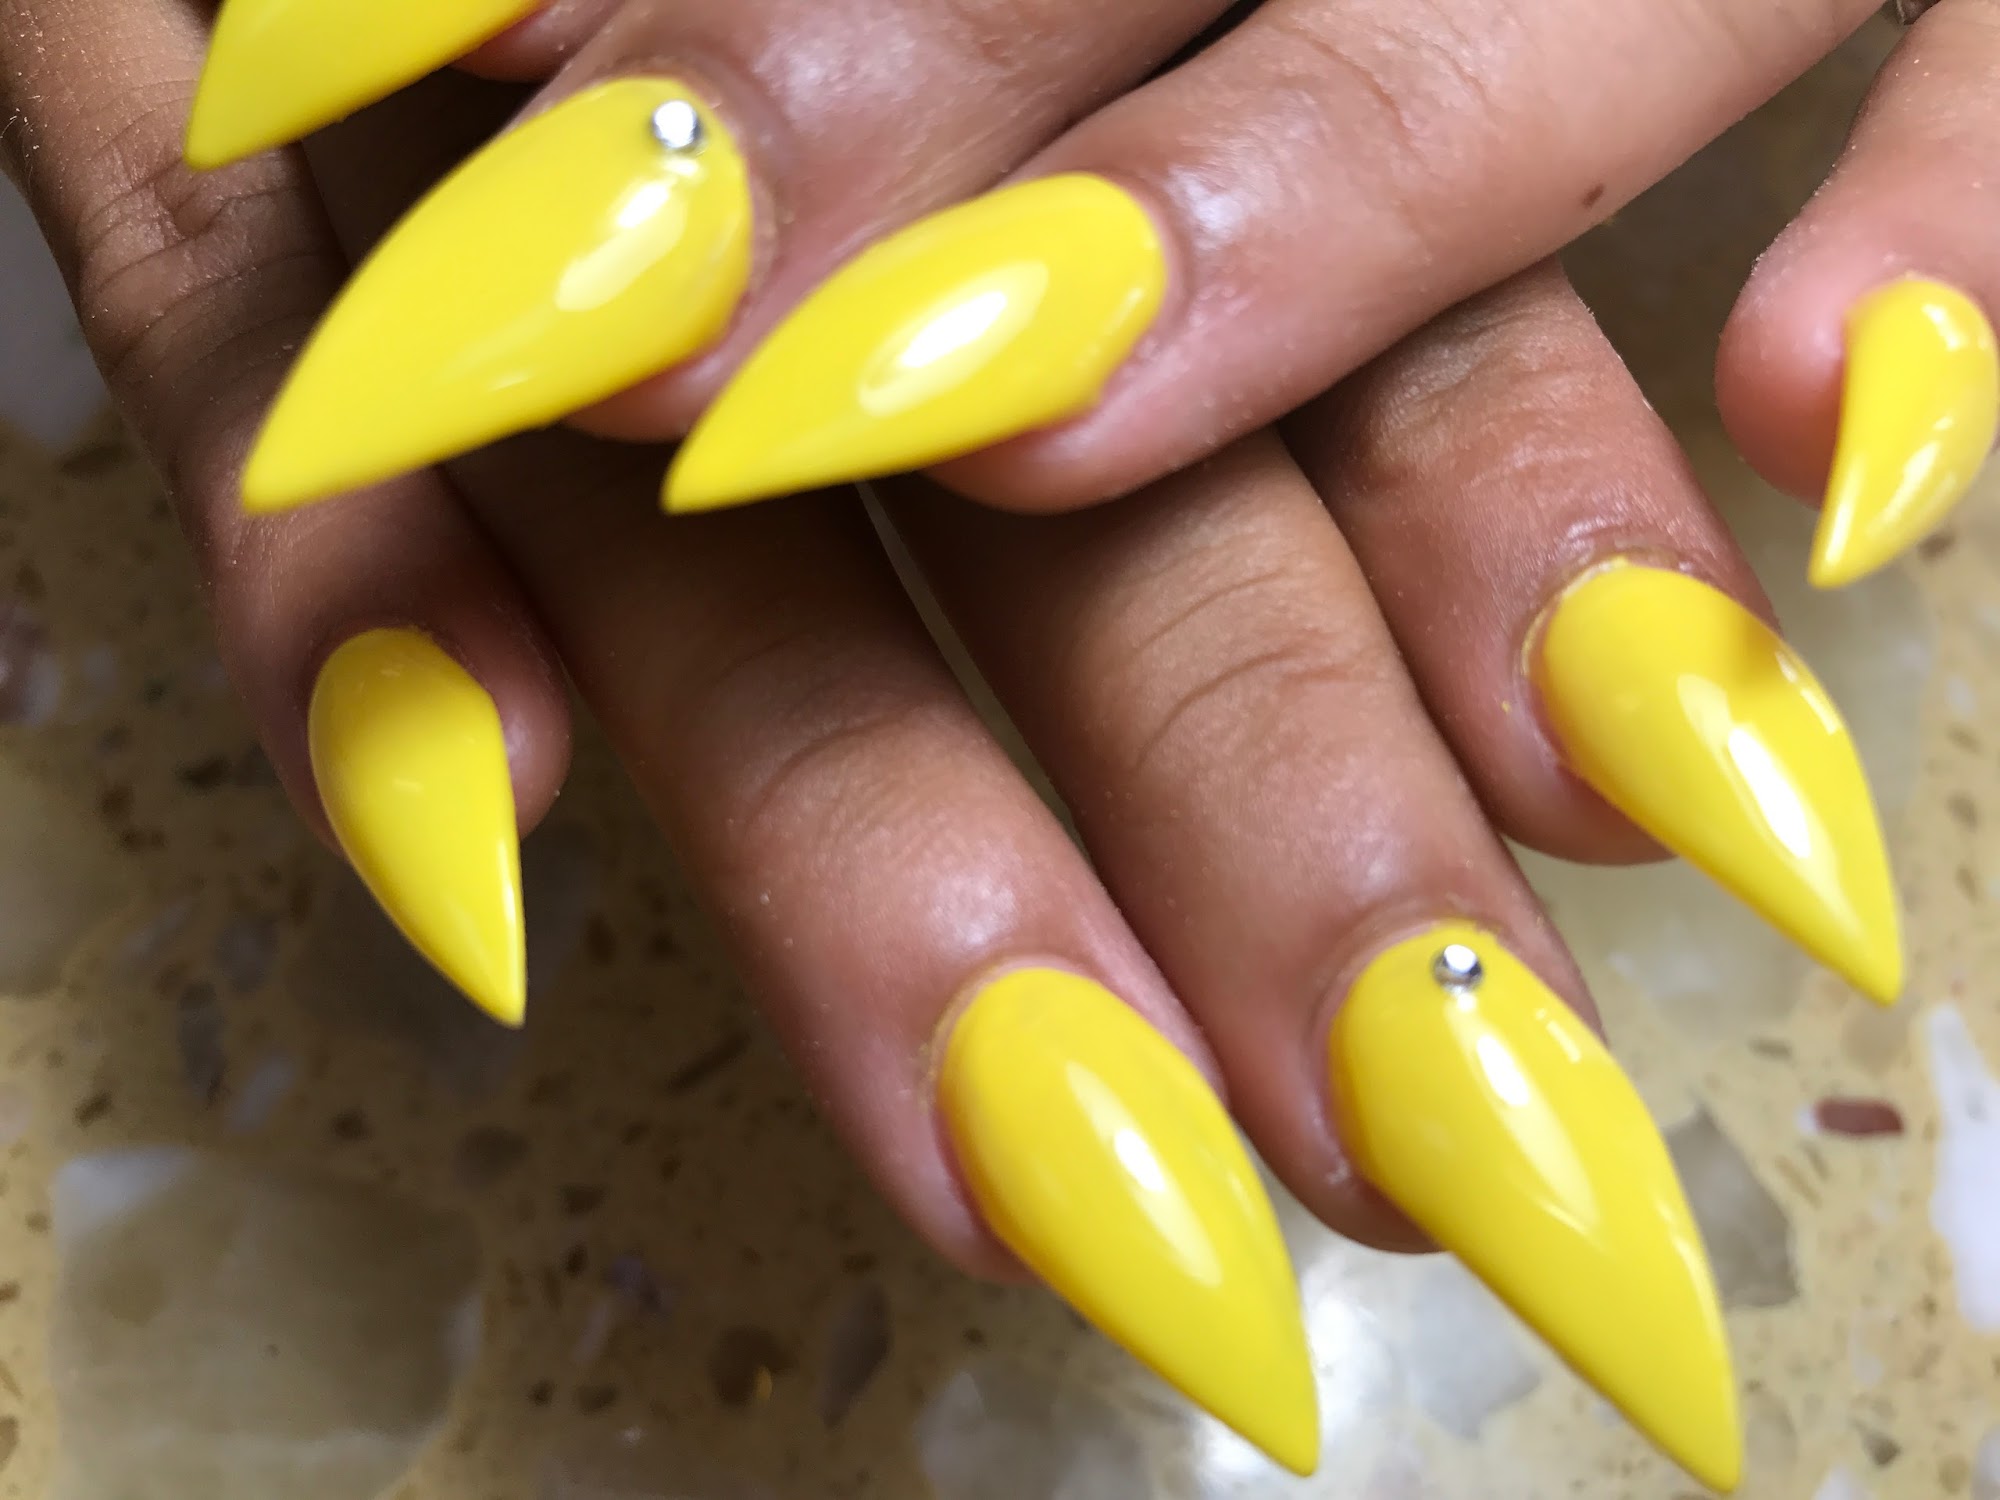 About nails and spa 12536 B, Eastern Ave, Middle River Maryland 21220